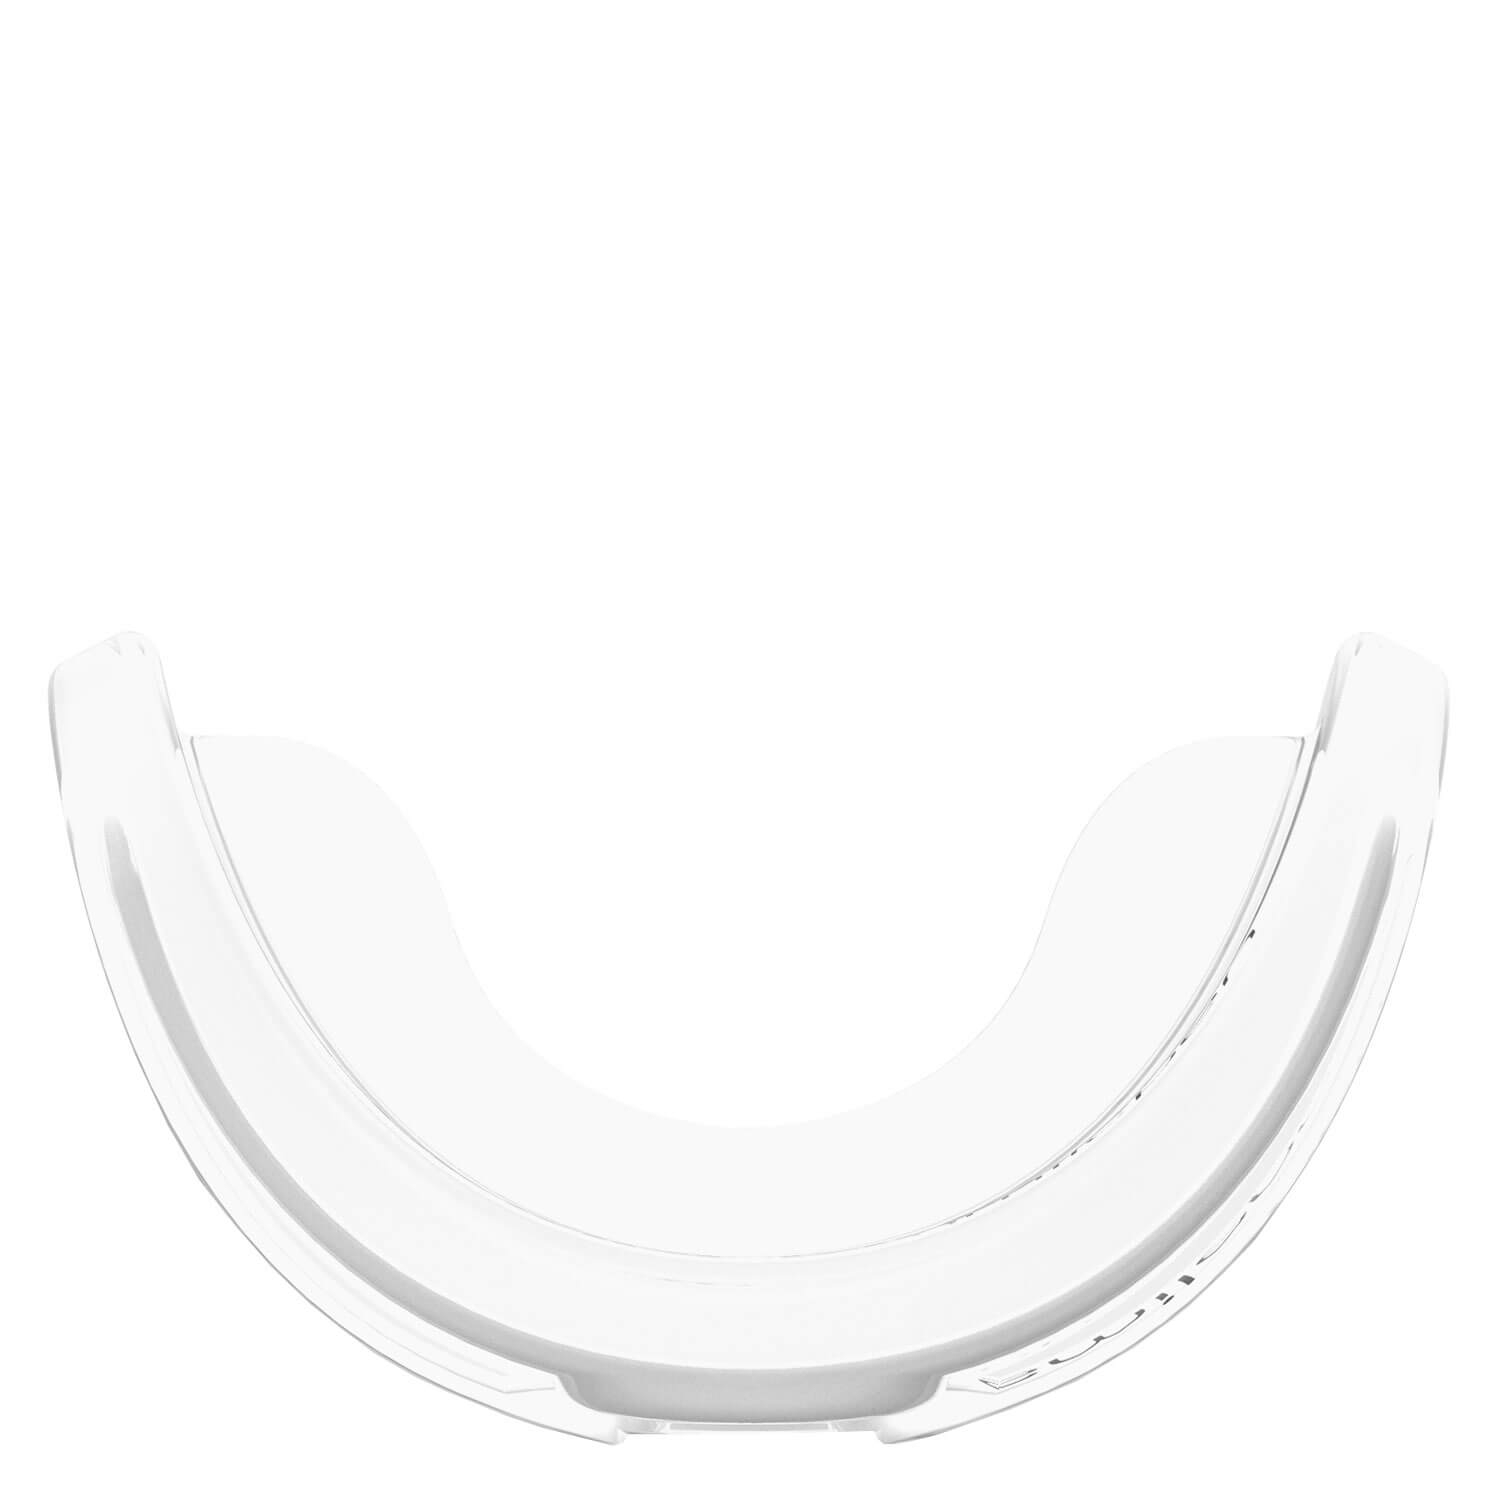 Product image from smilepen - Whitening Tray